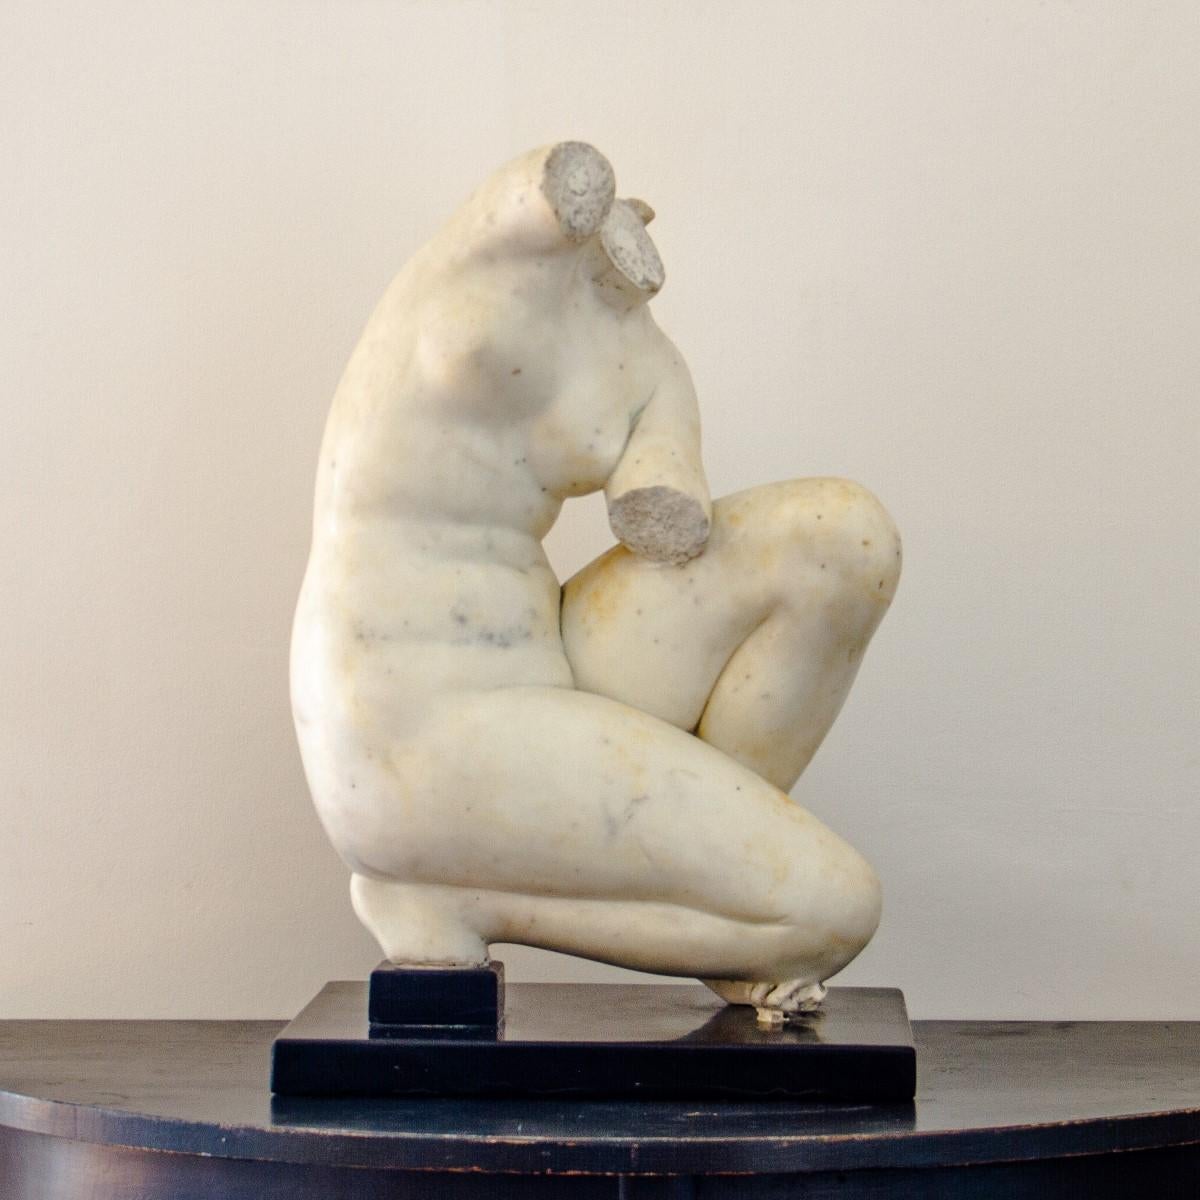 A Grand Tour, After the Antique, early 19th century fragment of the crouching Venus, in white marble and set on an ebonised base. 

The Grand Tour was the traditional trip of Europe undertaken by mainly upper-class European young men of means. The